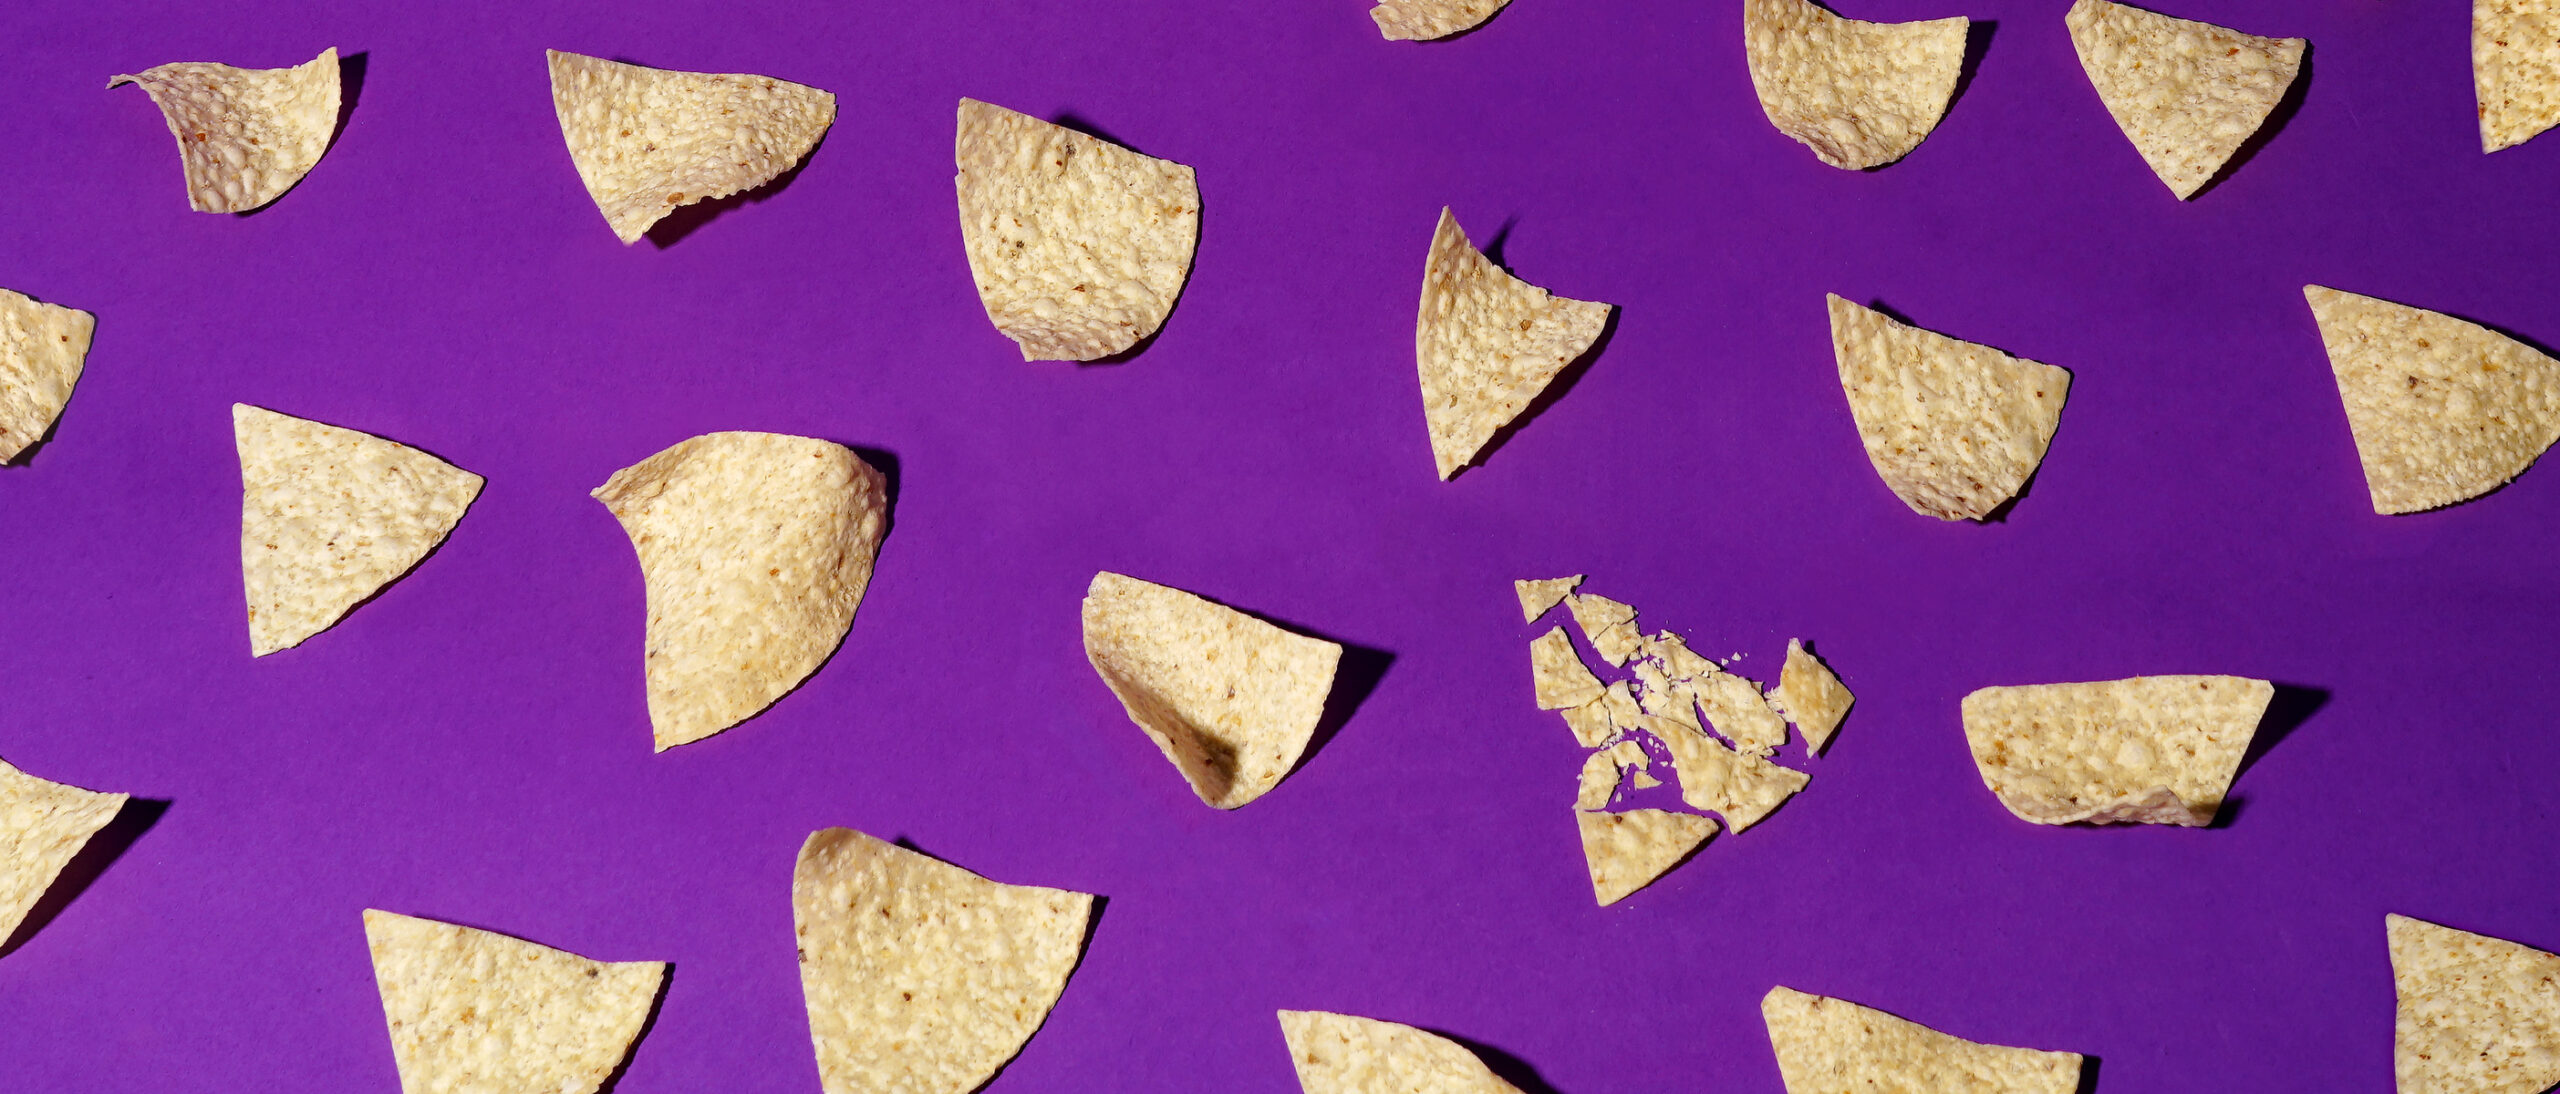 Cheap and Crazy Creative Chip Recipes To Make at Home